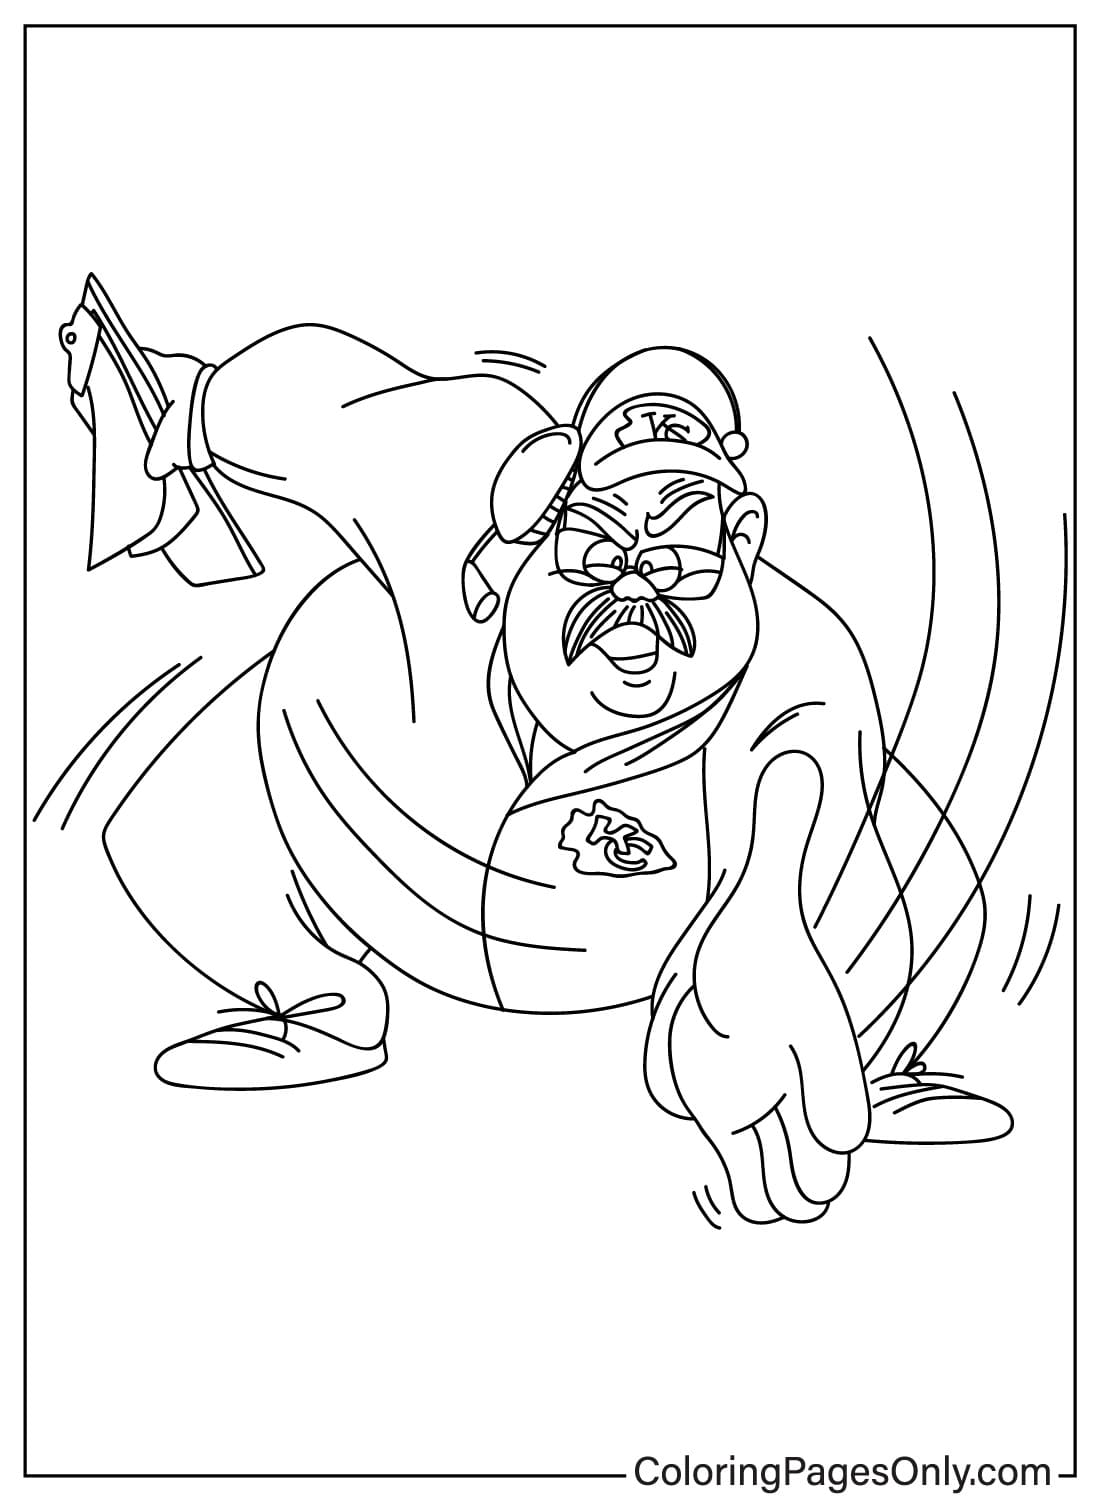 Andy Reid Coloring Page - Free Printable Coloring Pages